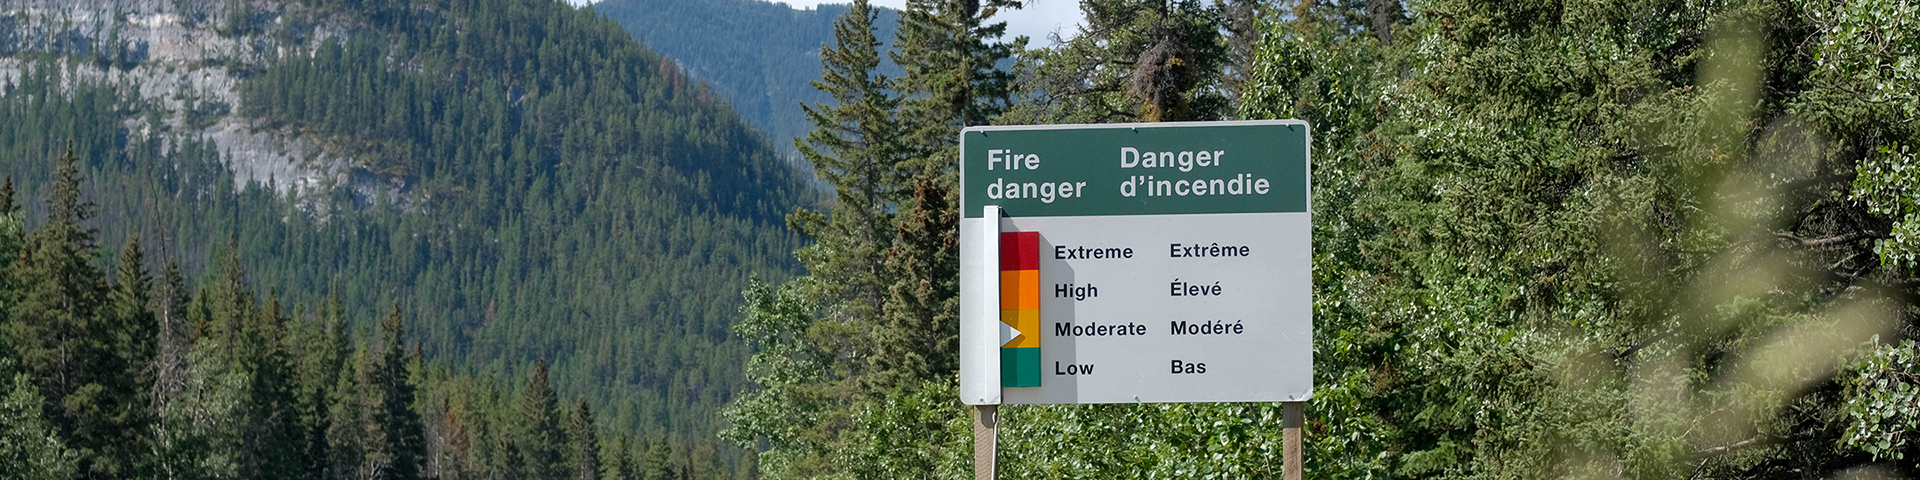 Fire danger sign at moderate